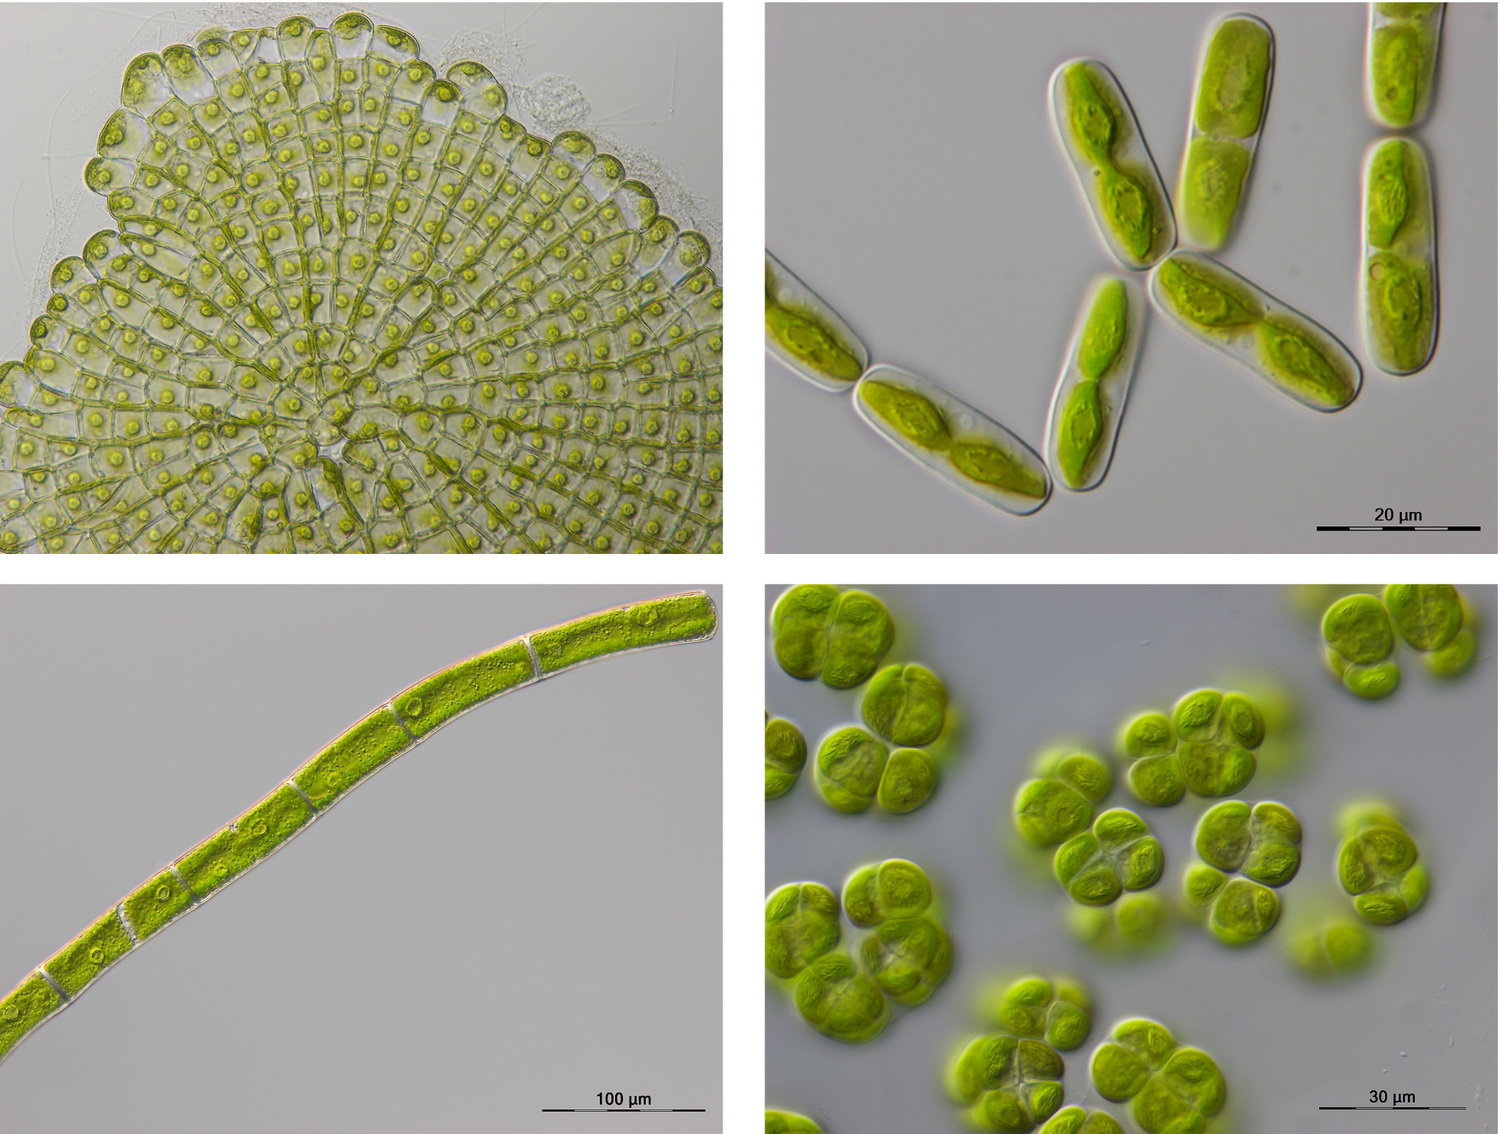 Producing high quality reference genomes for plants, like this humble streptophyte alga, can provide important clues for understanding the evolution of plants on land as well as different methods of photosynthesis and so inform conservation measures